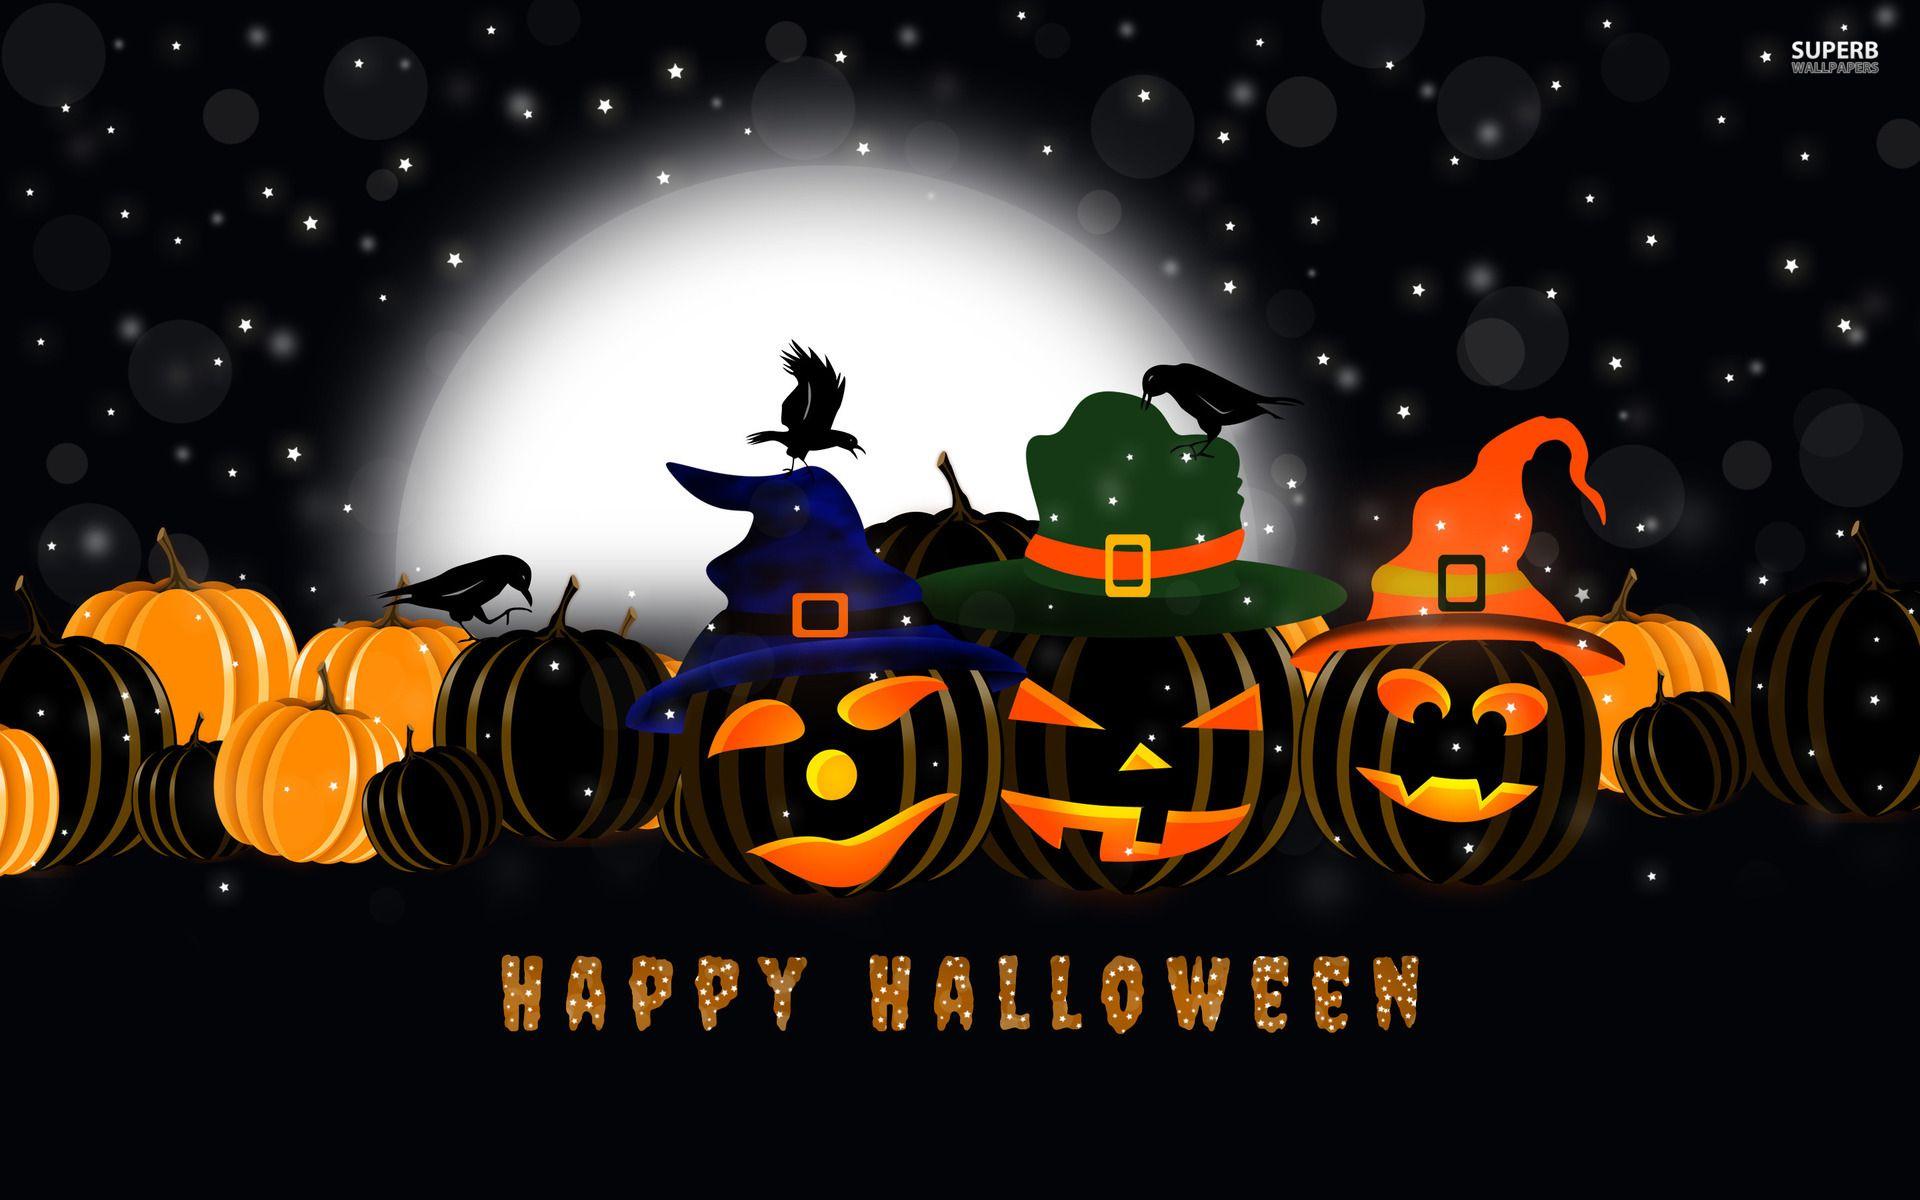 Happy Halloween 2019 Image, Quotes, Wishes, Picture